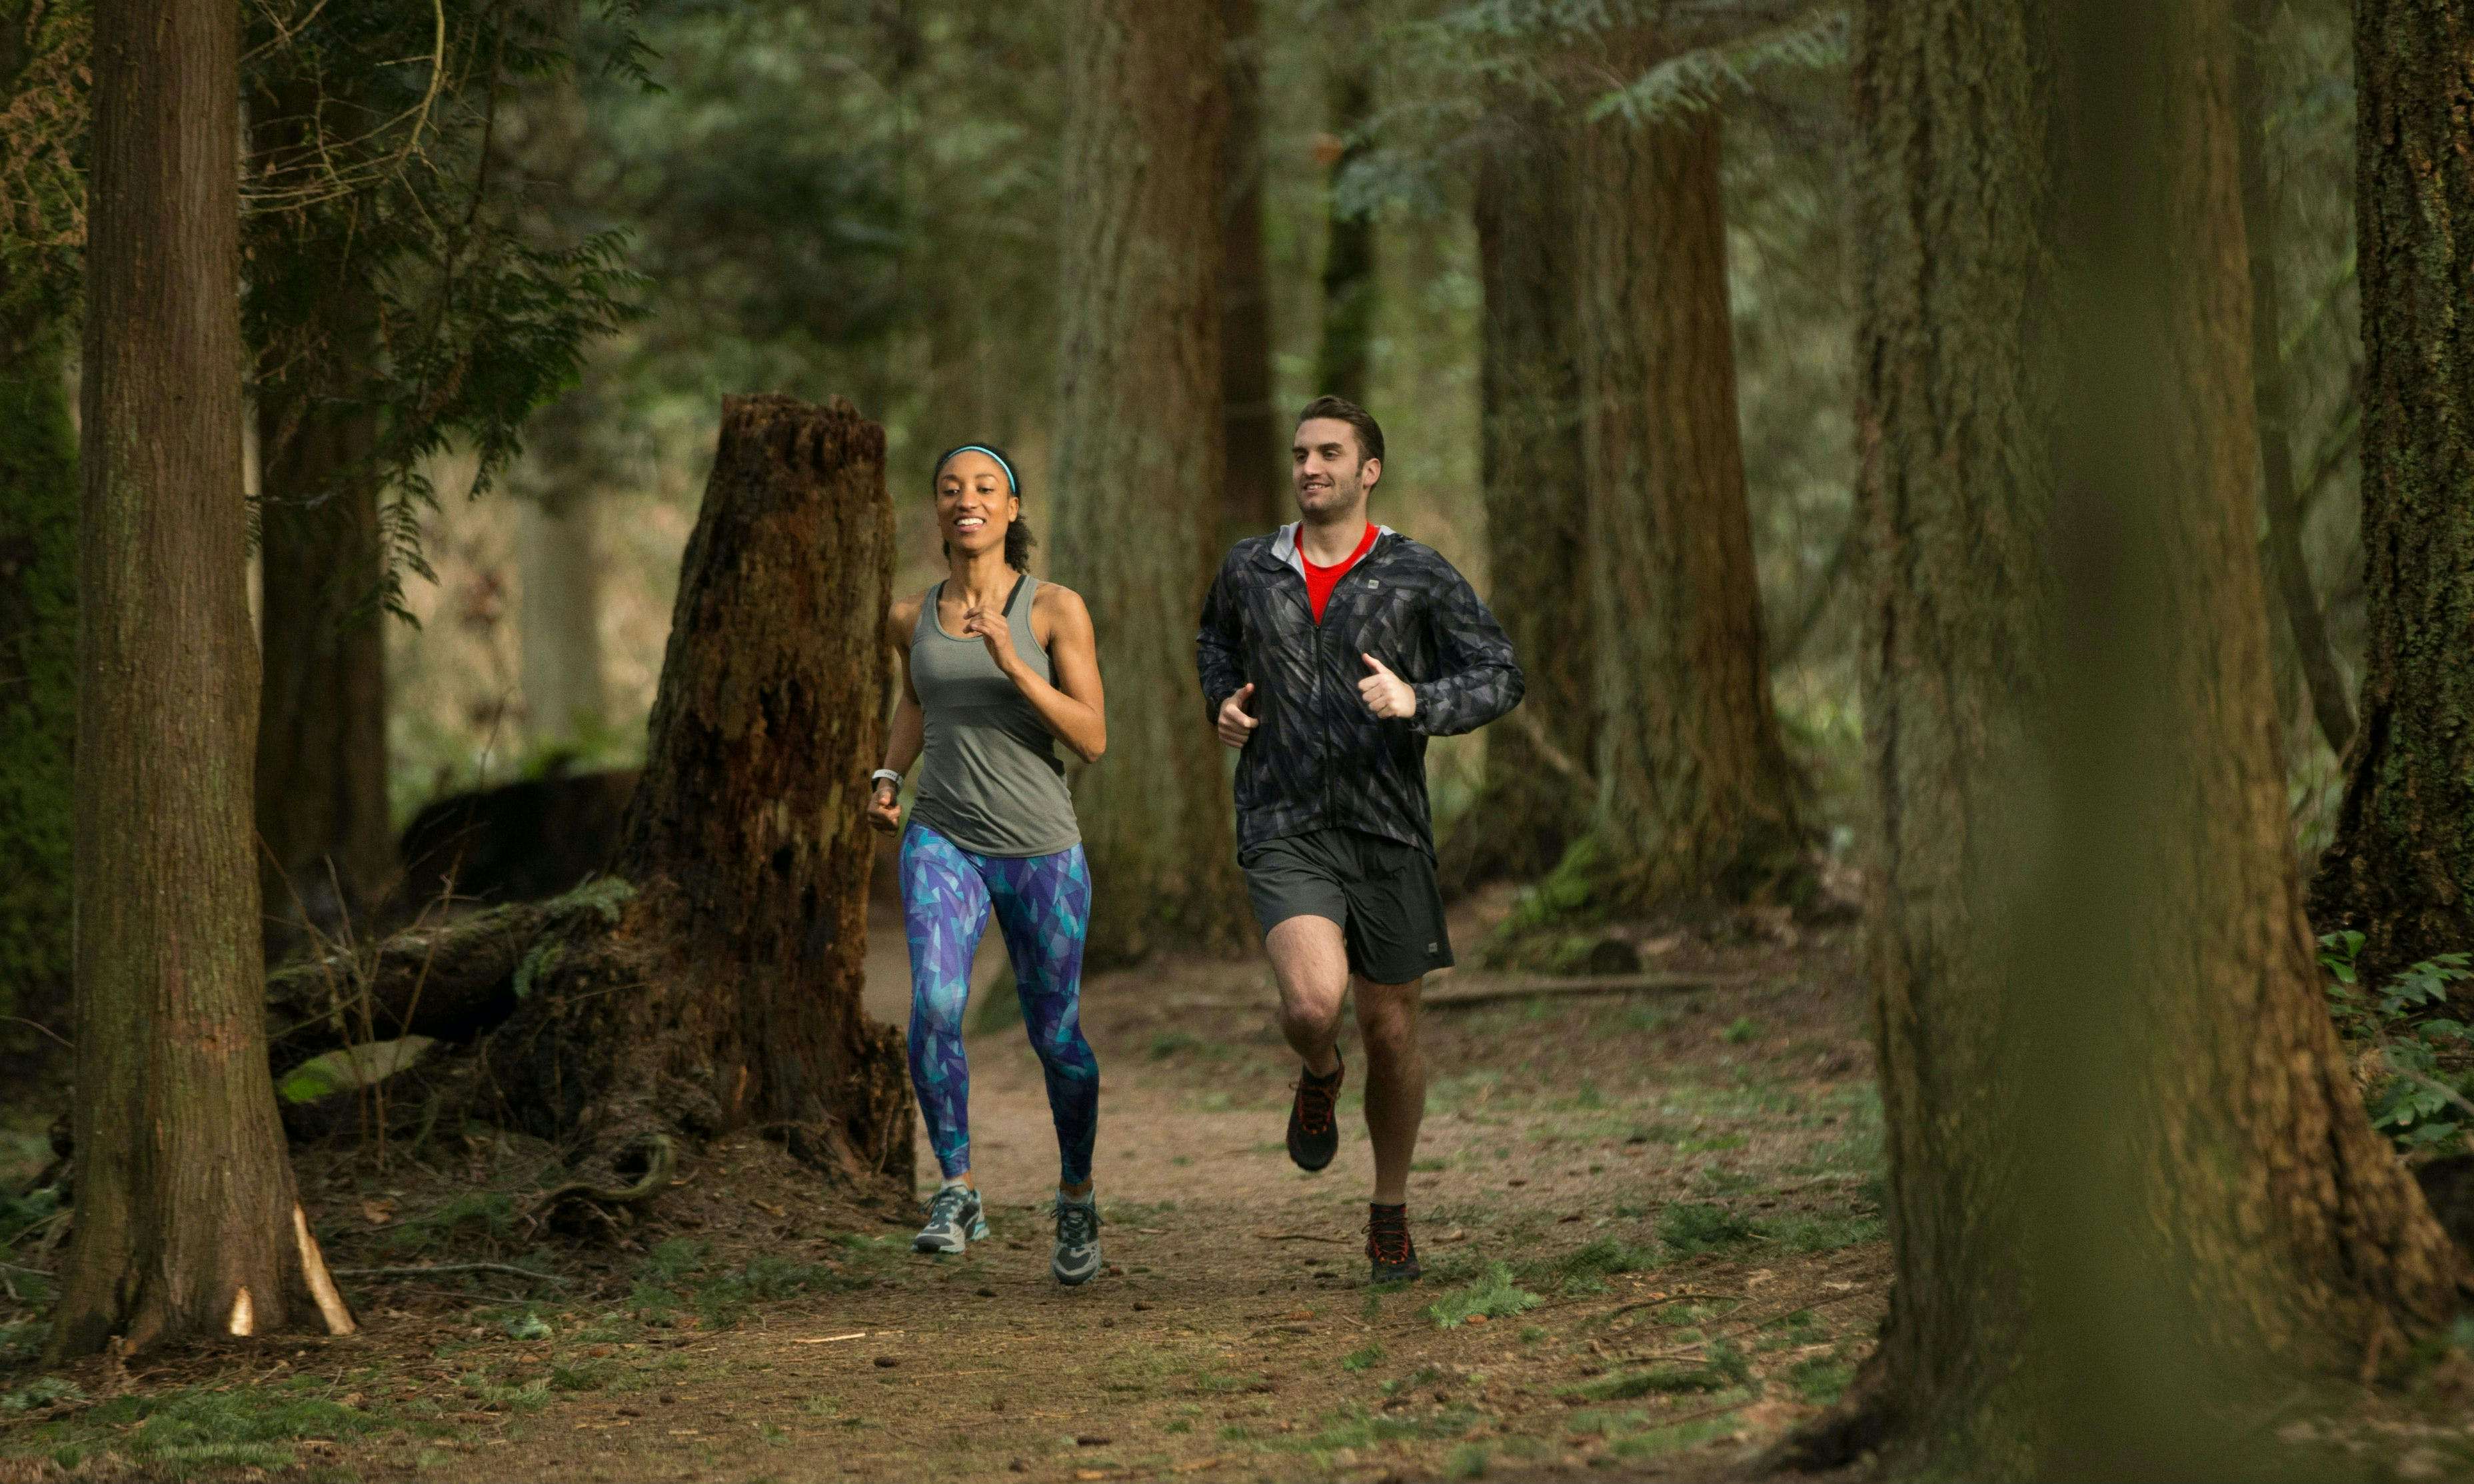 Two trail runners in the forest